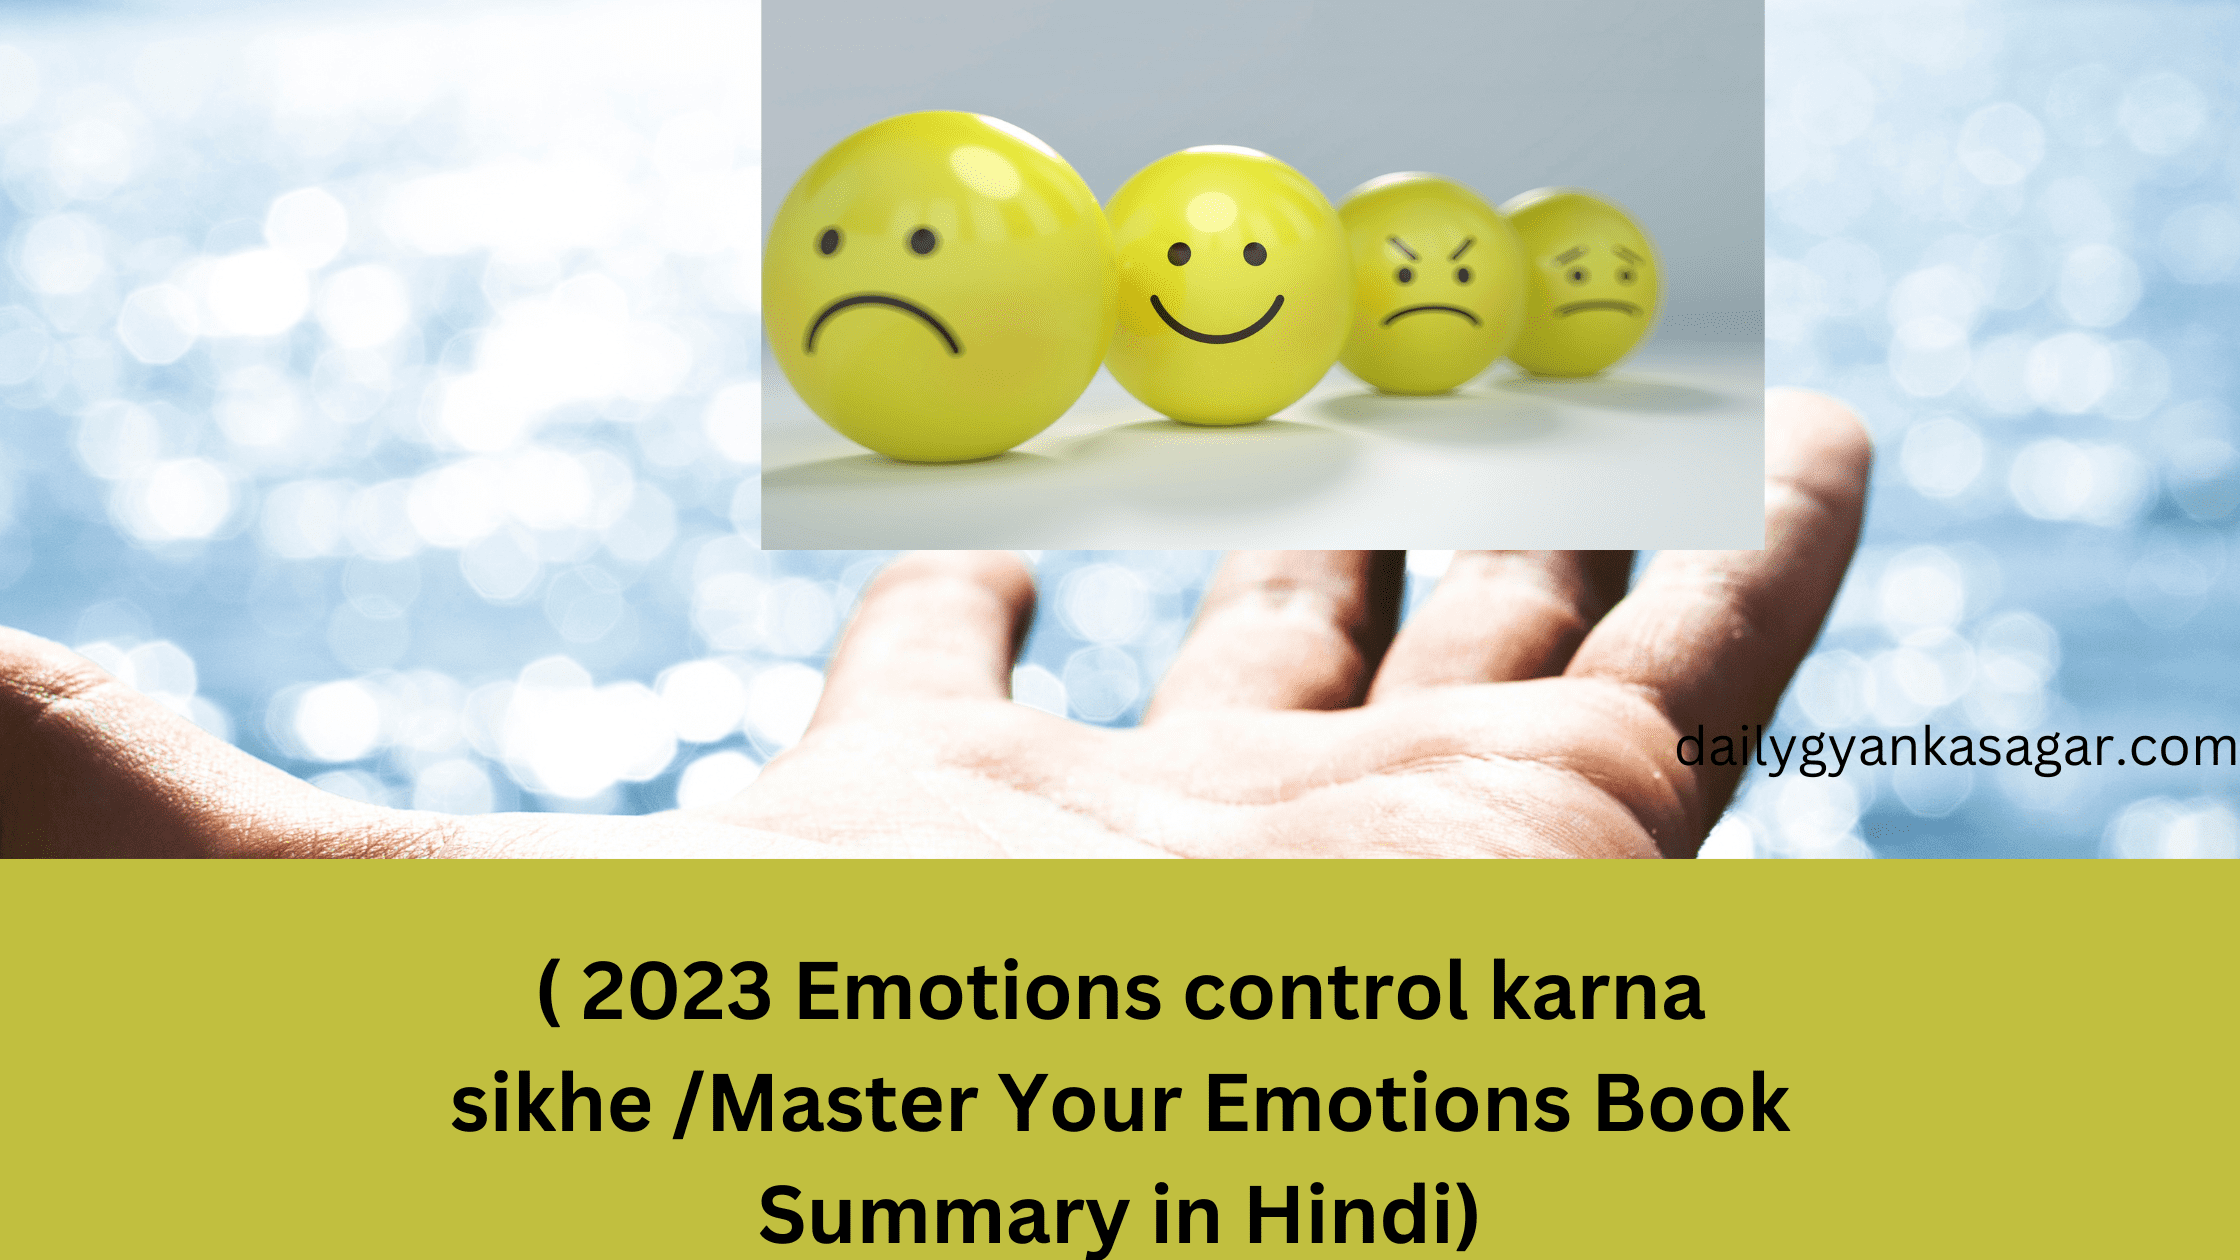 ( 2023 Emotions control karna sikhe /Master Your Emotions Book Summary in Hindi)